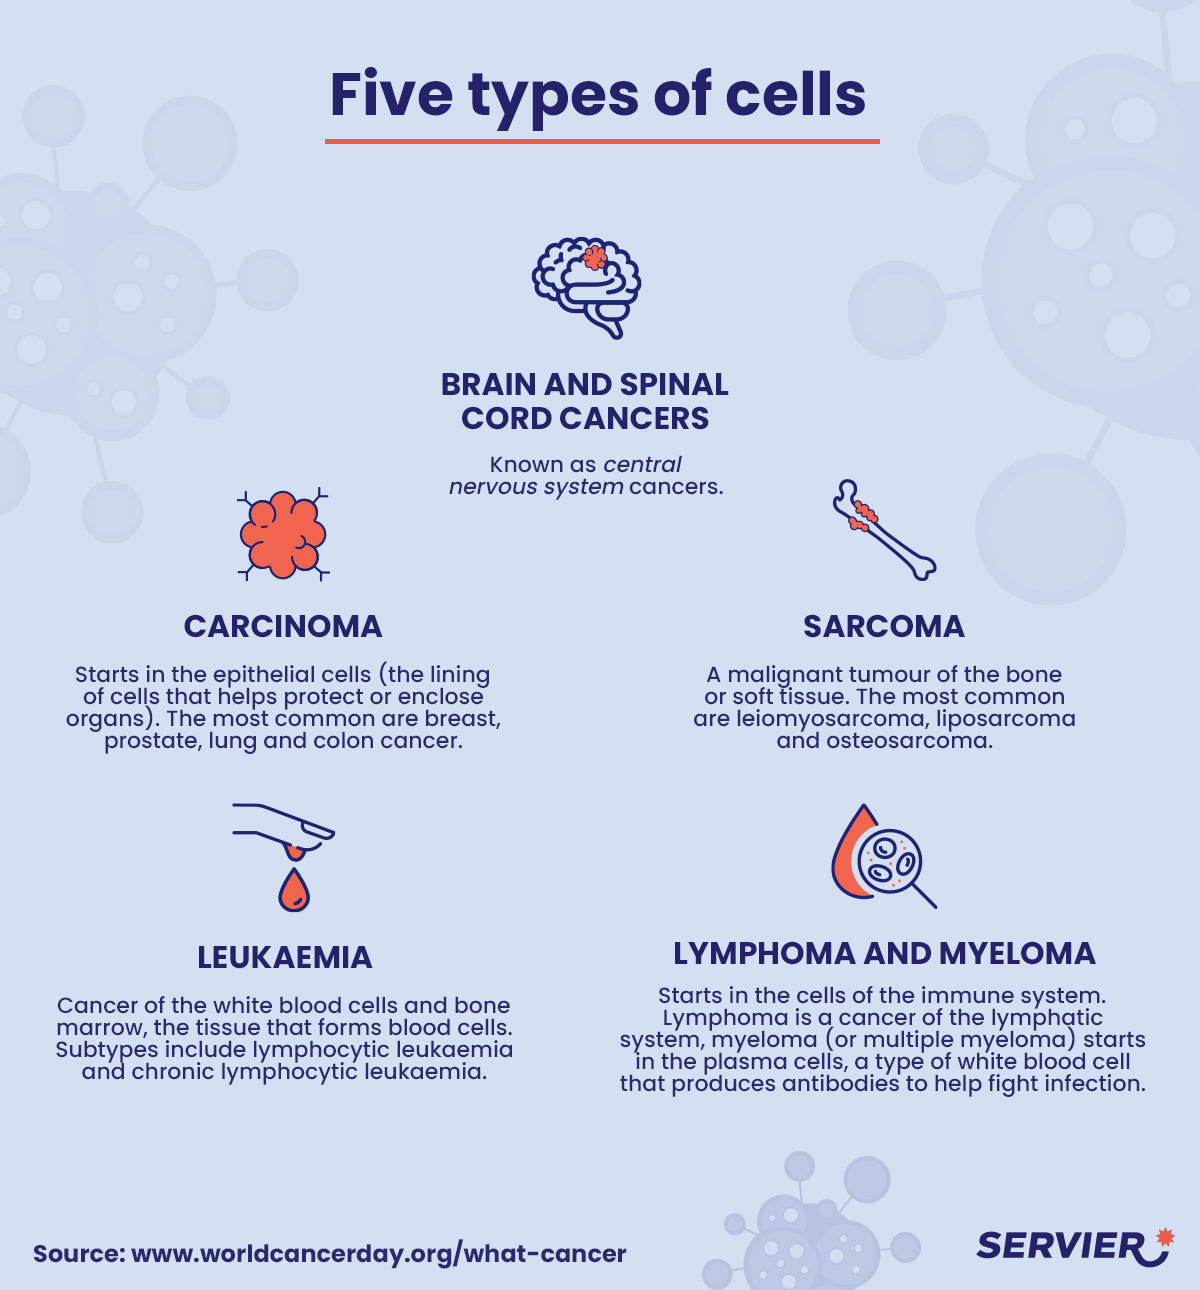 Five types of cells